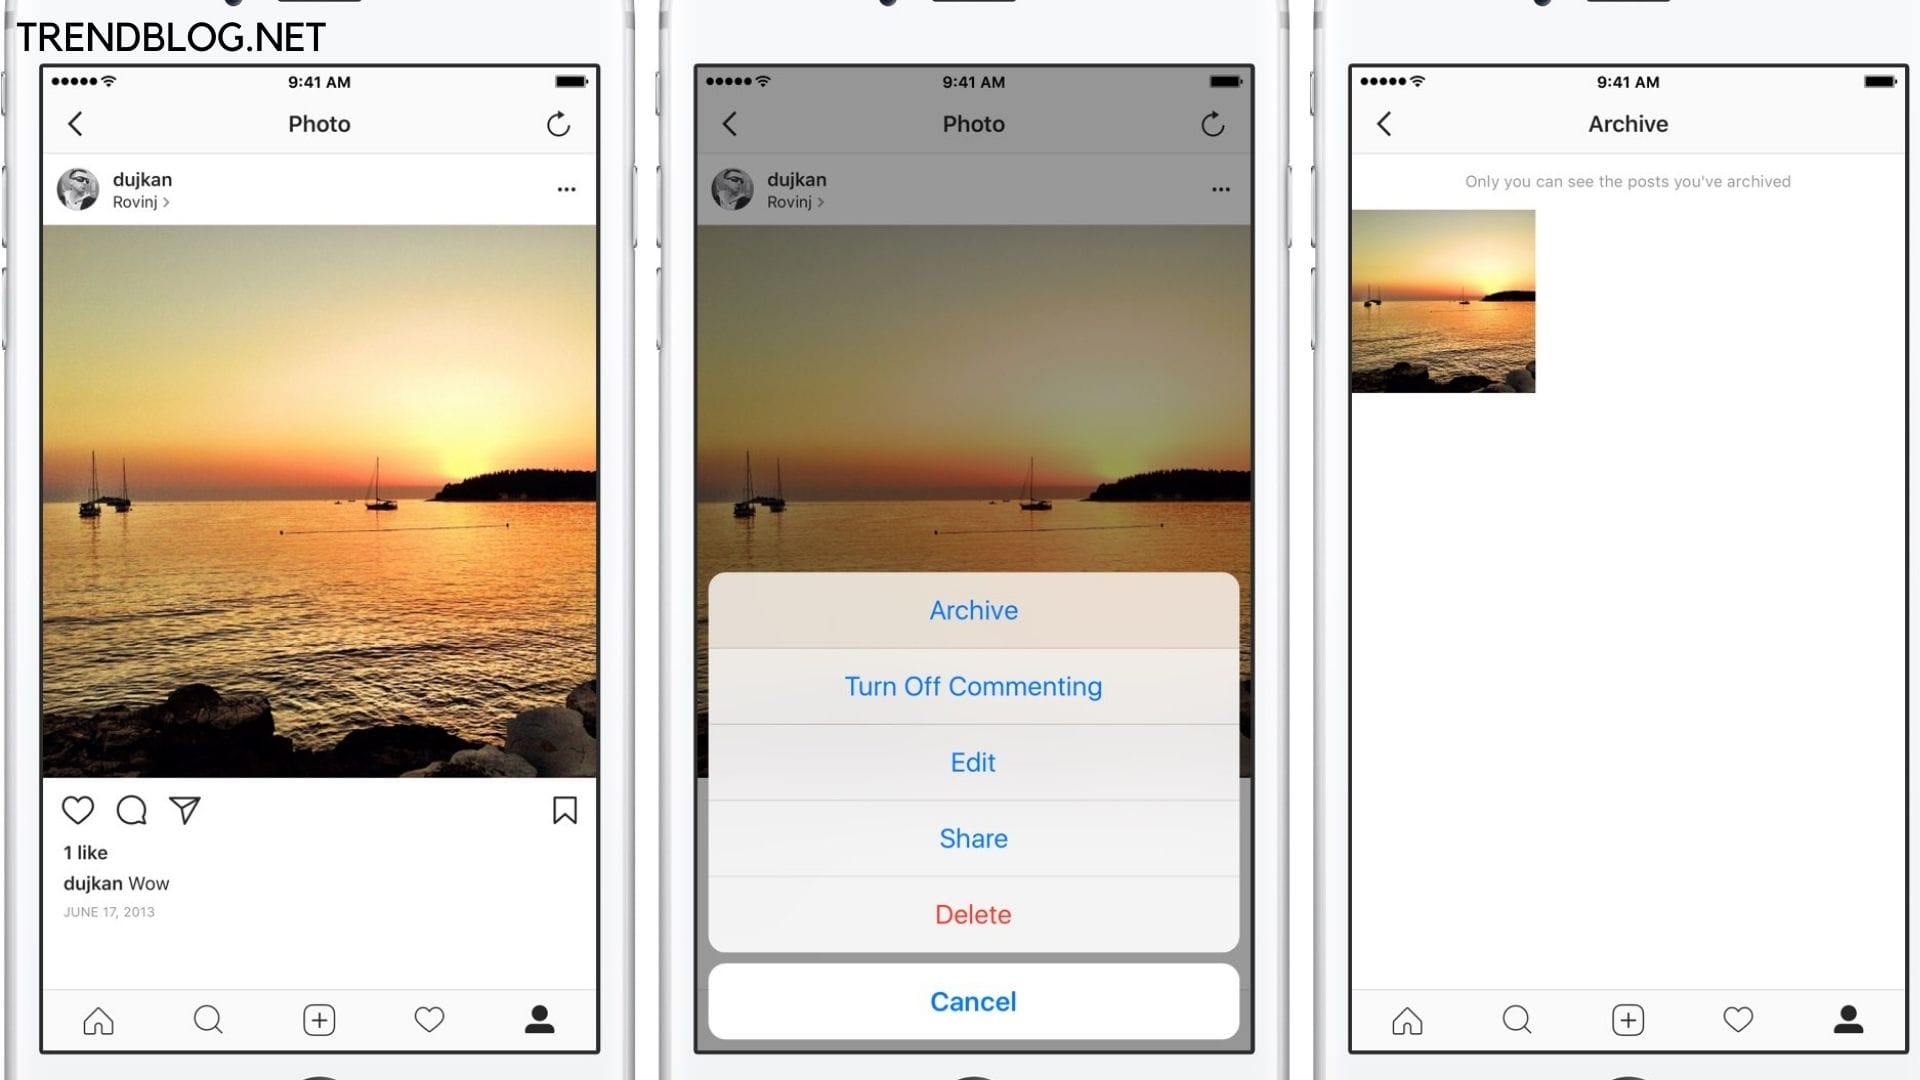 How to See the Archived Posts on Instagram Using Effective Tricks